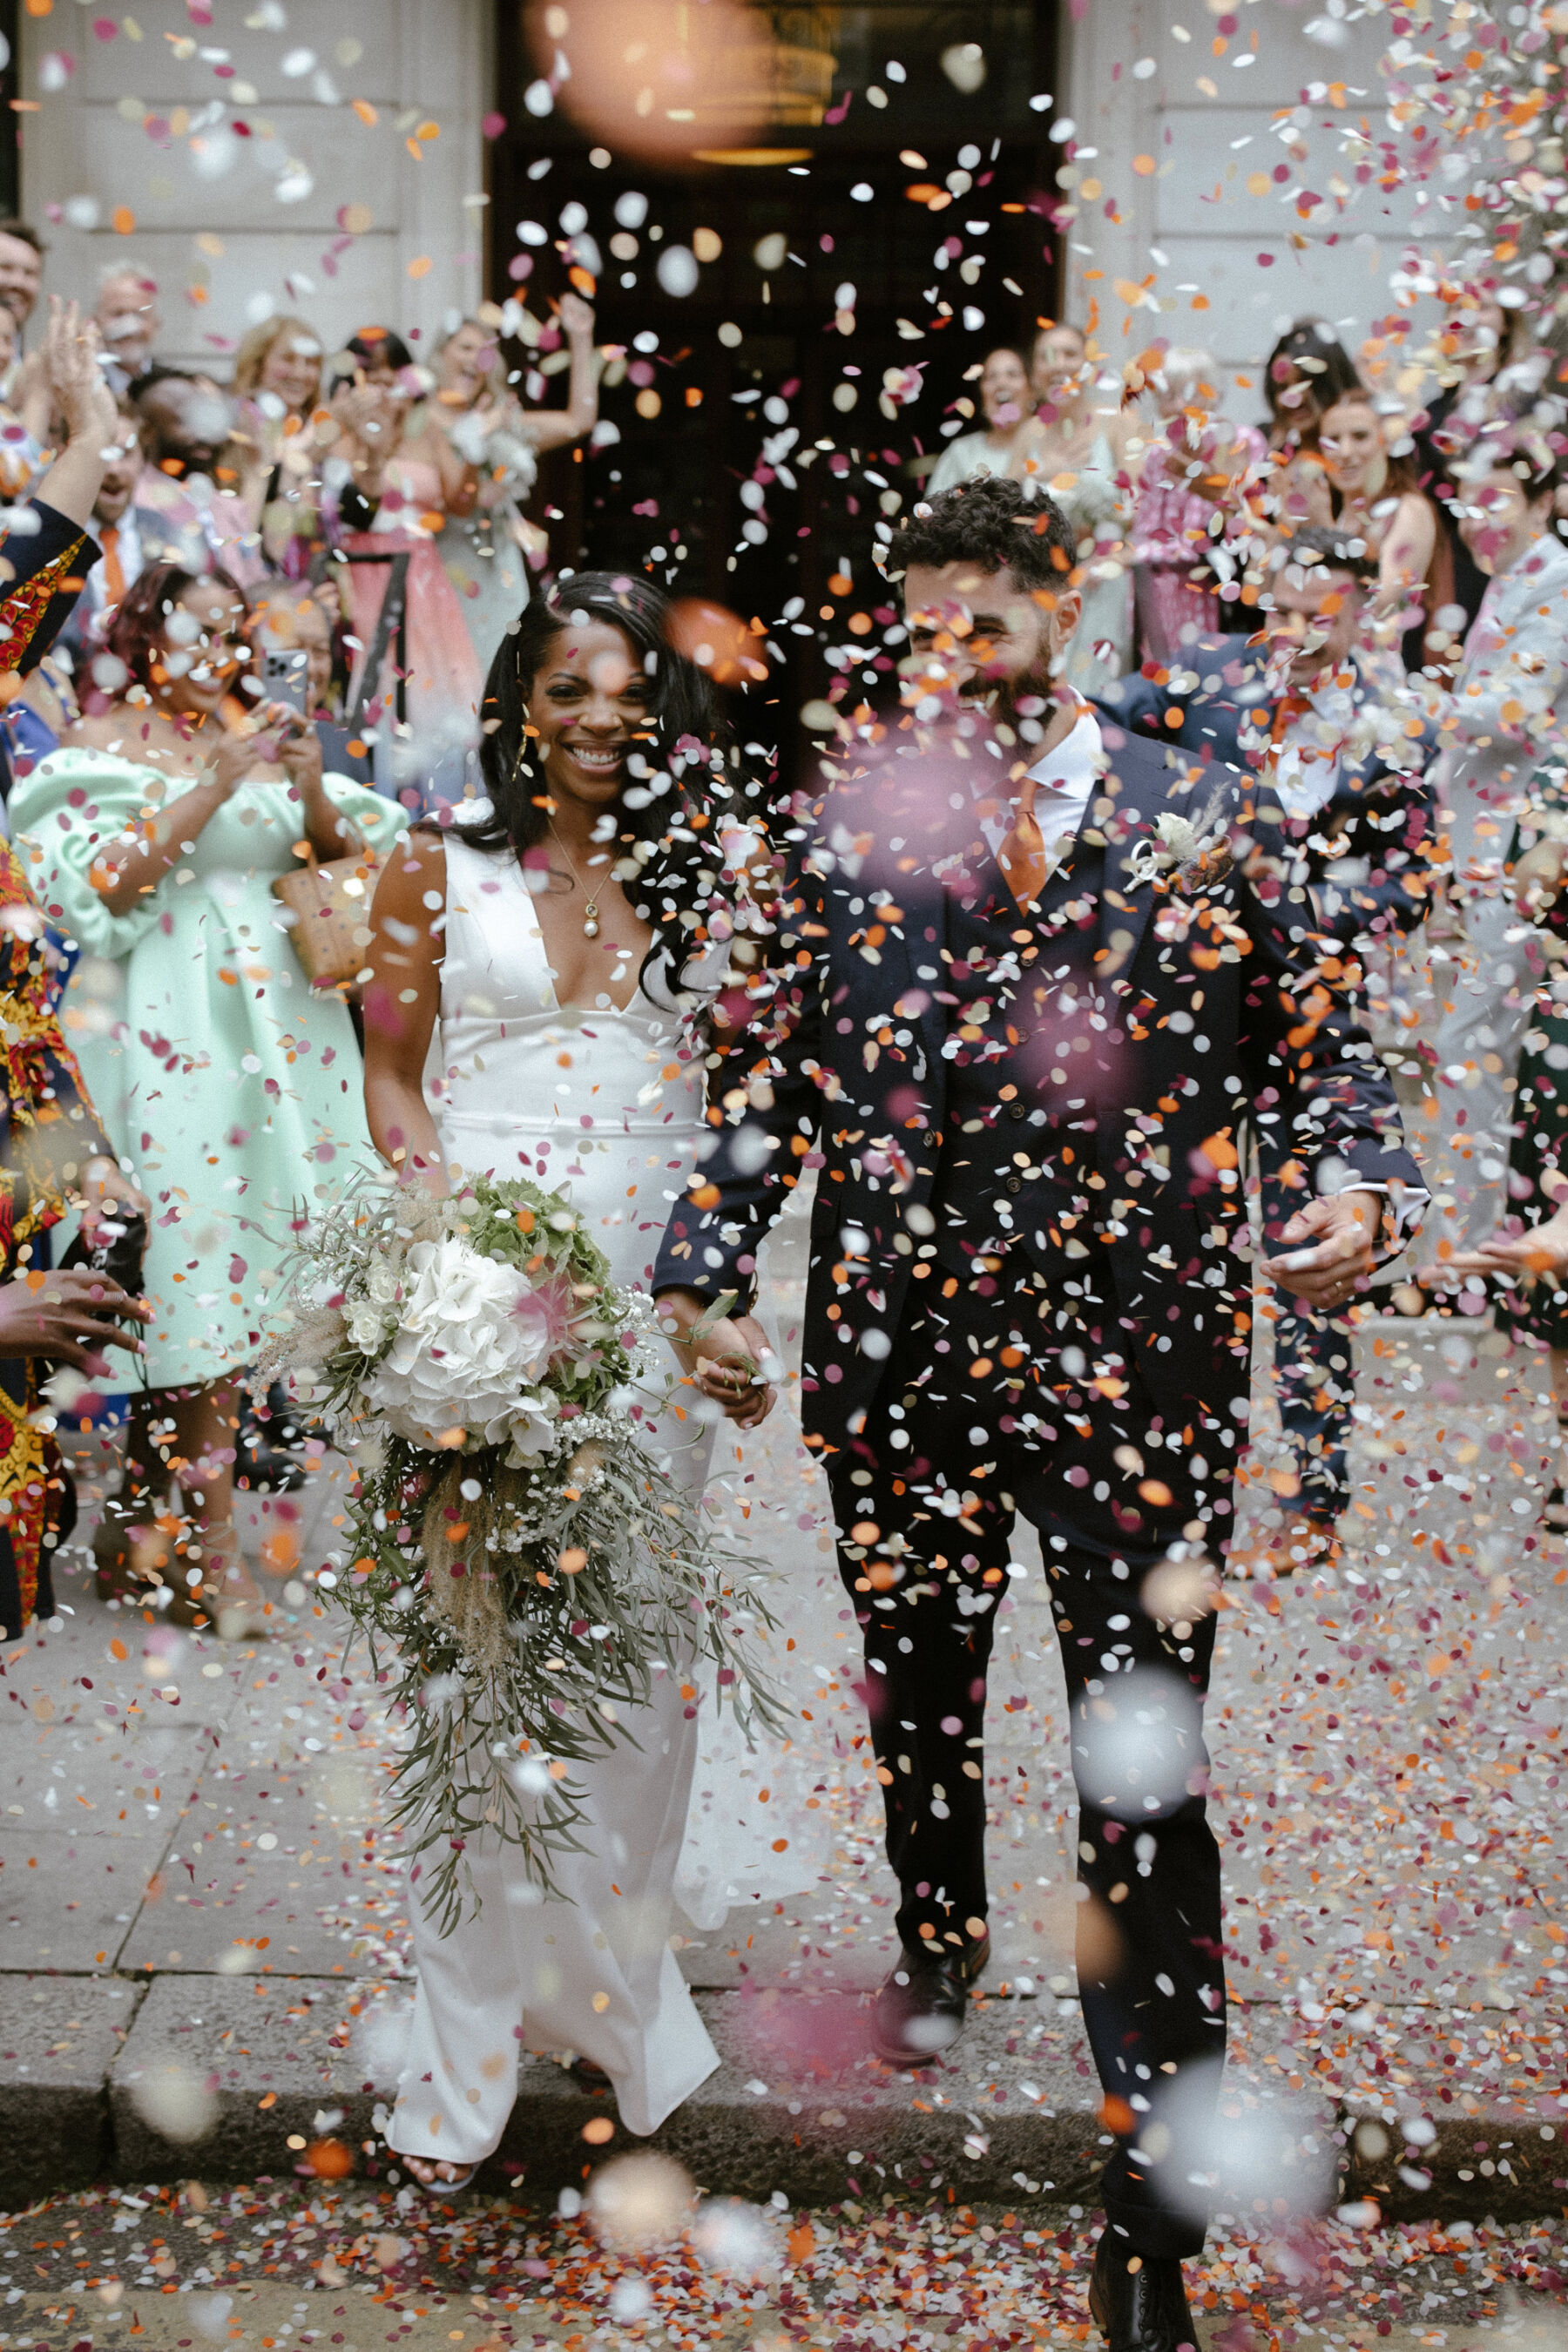 Modern bride and groom shrouded in a cloud of colourful confetti. Bride wears a minimalist dress by Sarah Seven. Ruth Atkinson Photography.